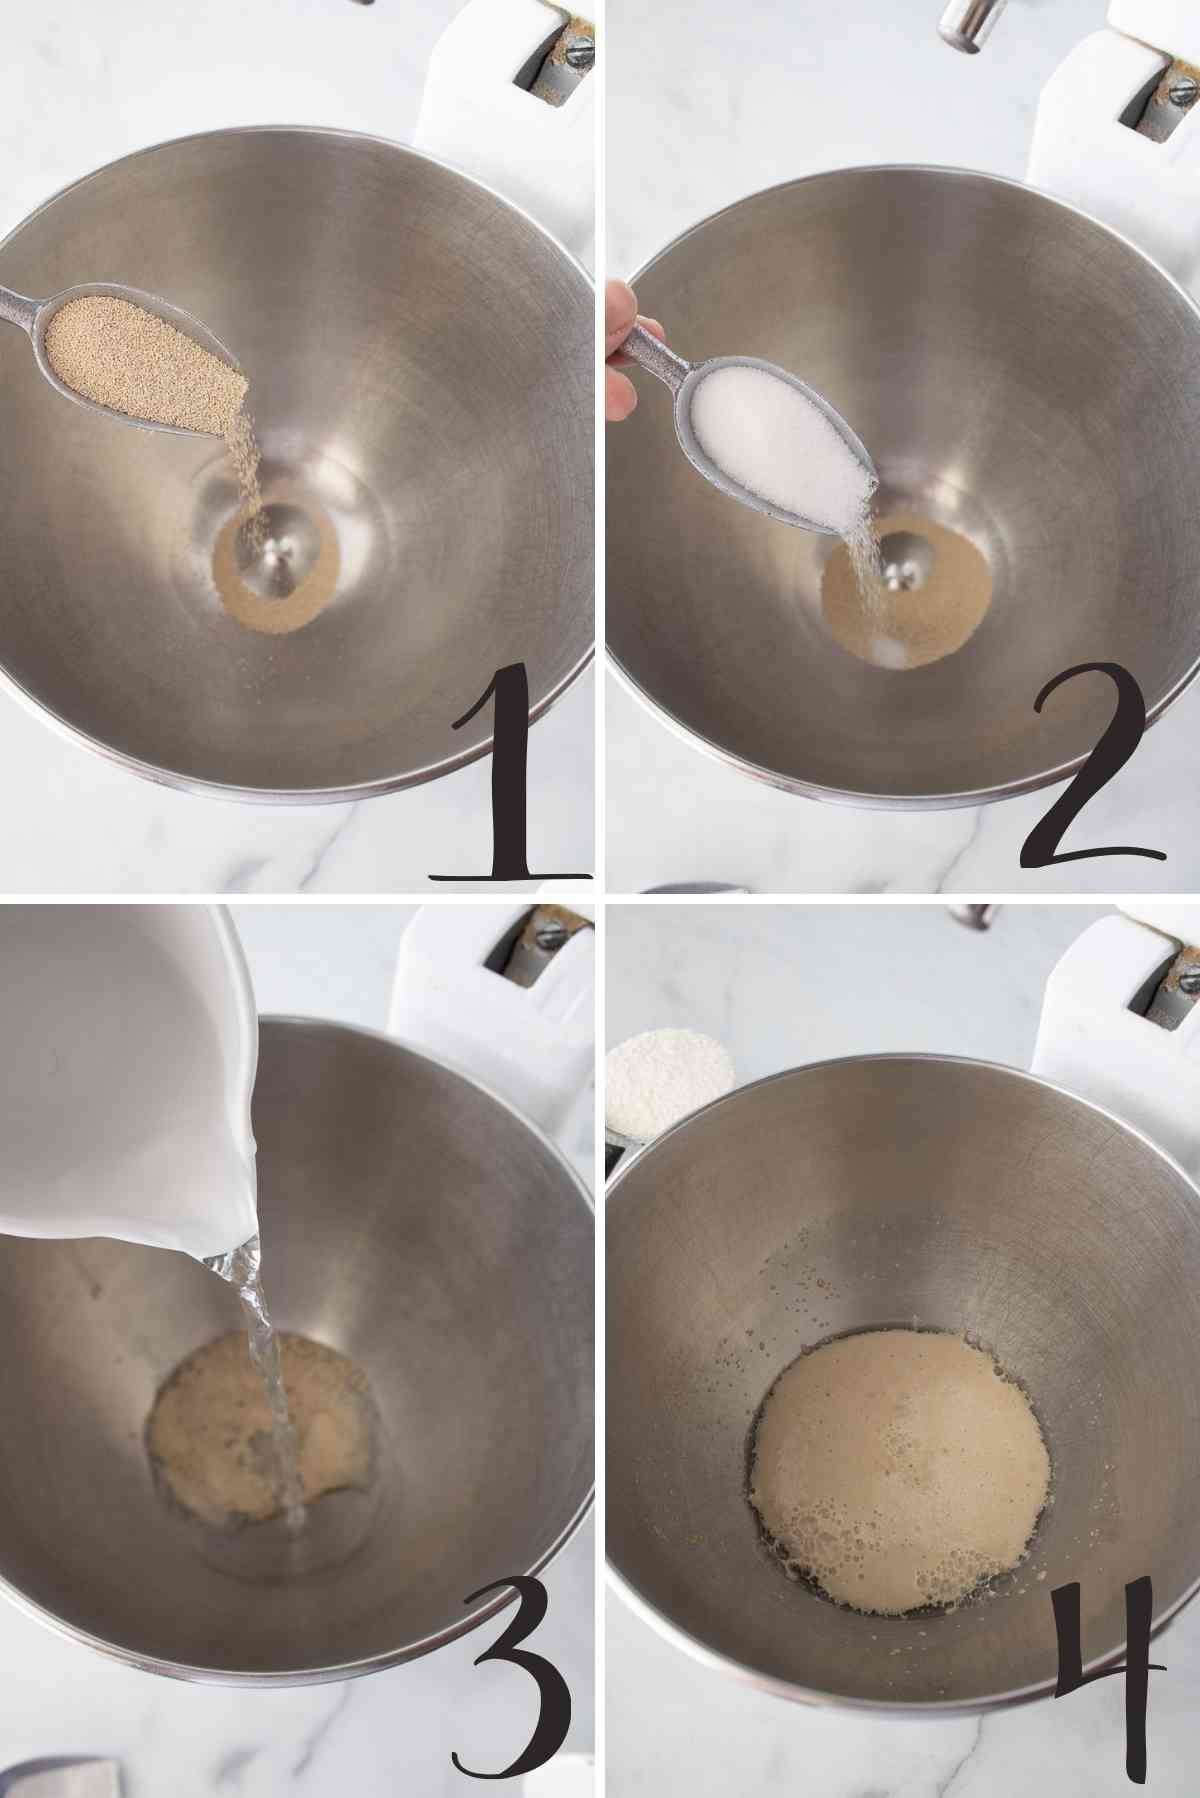 Yeast, sugar, warm water poured into a mixing bowl to get foamy.